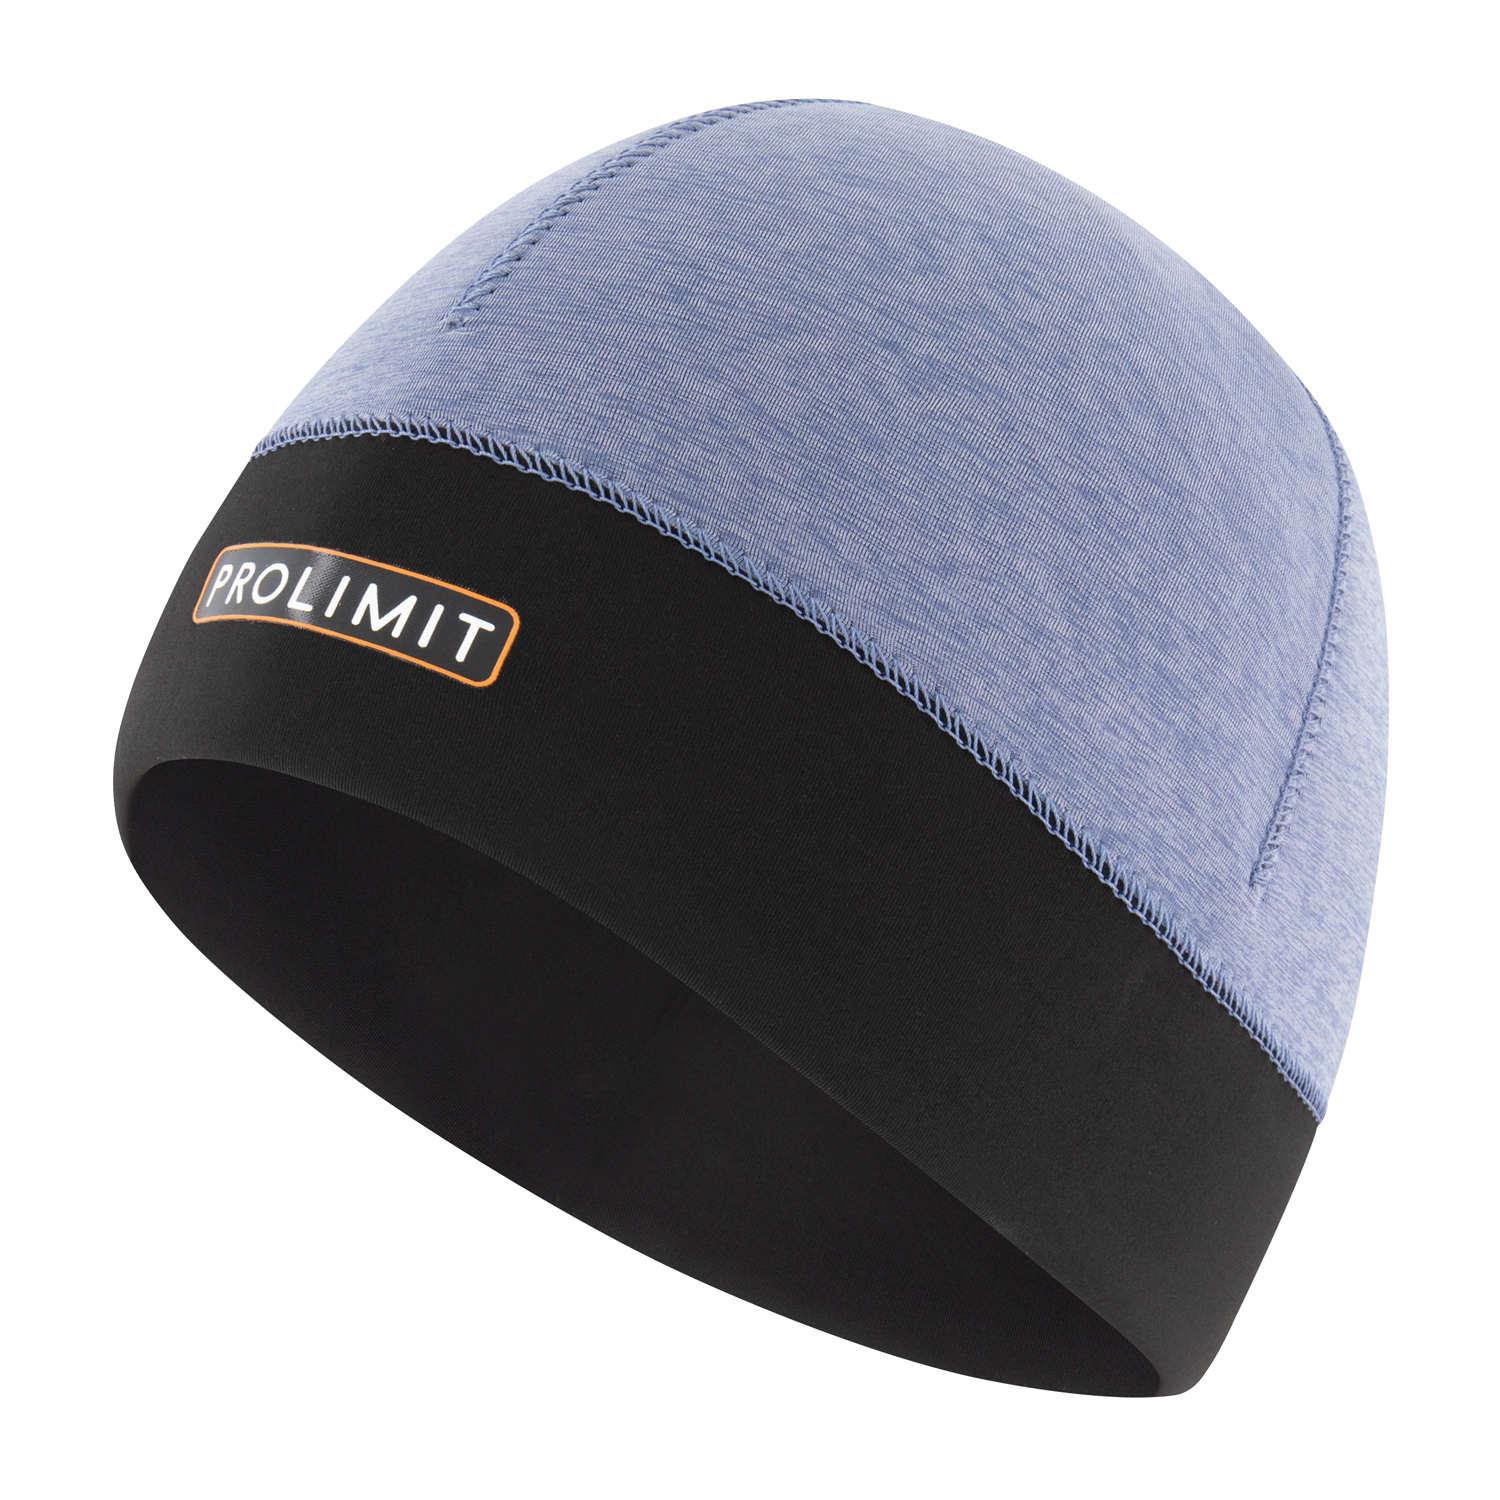 Prolimit Neo Beanie Polar Thermal - Poole Harbour Watersports